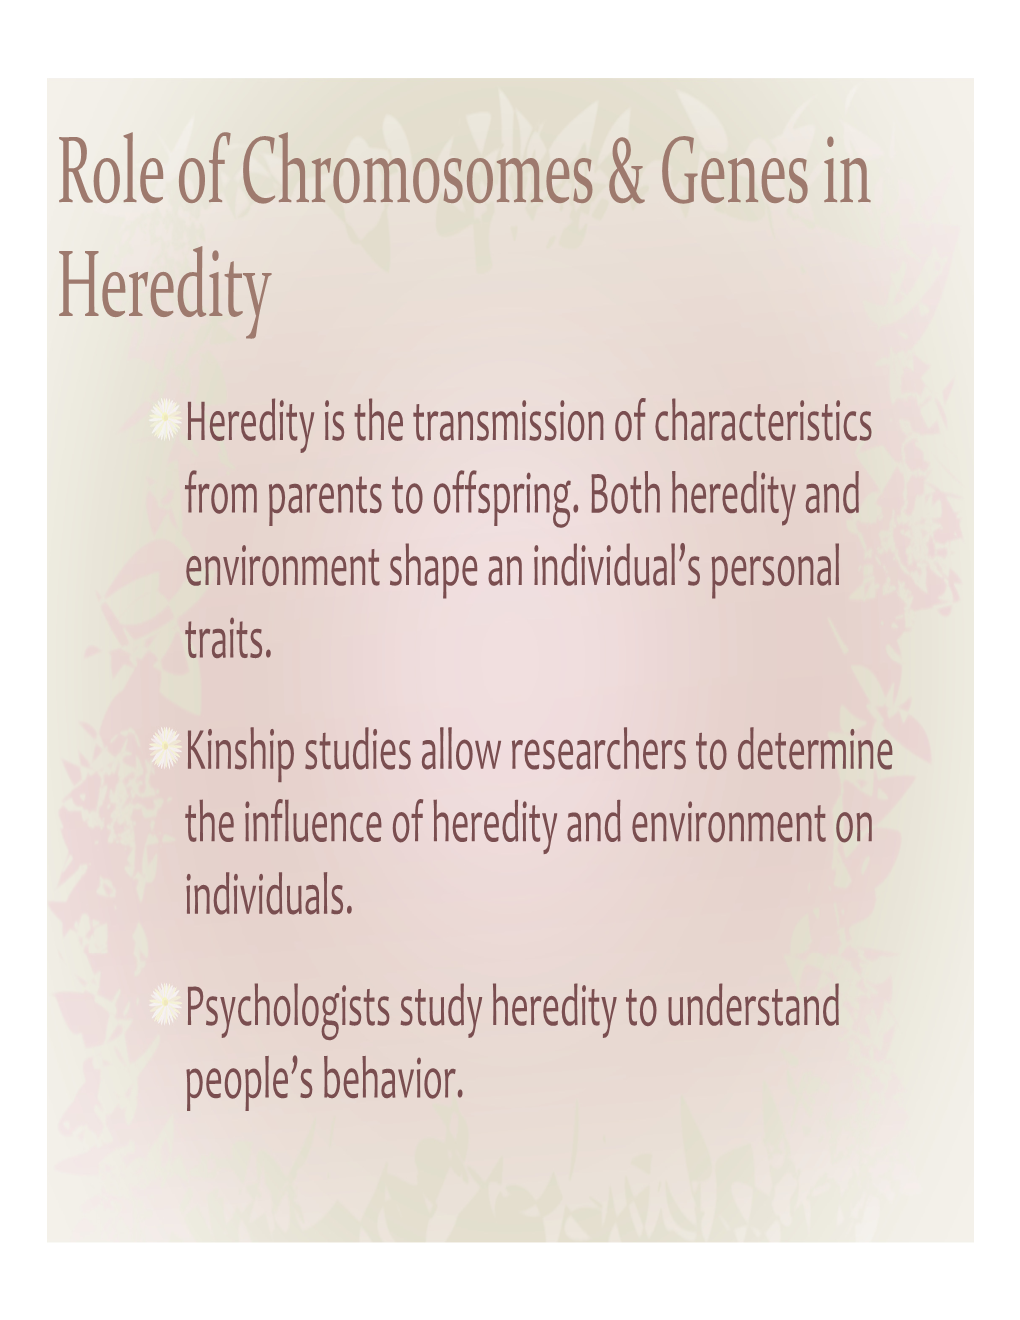 Role of Chromosomes & Genes in Heredity